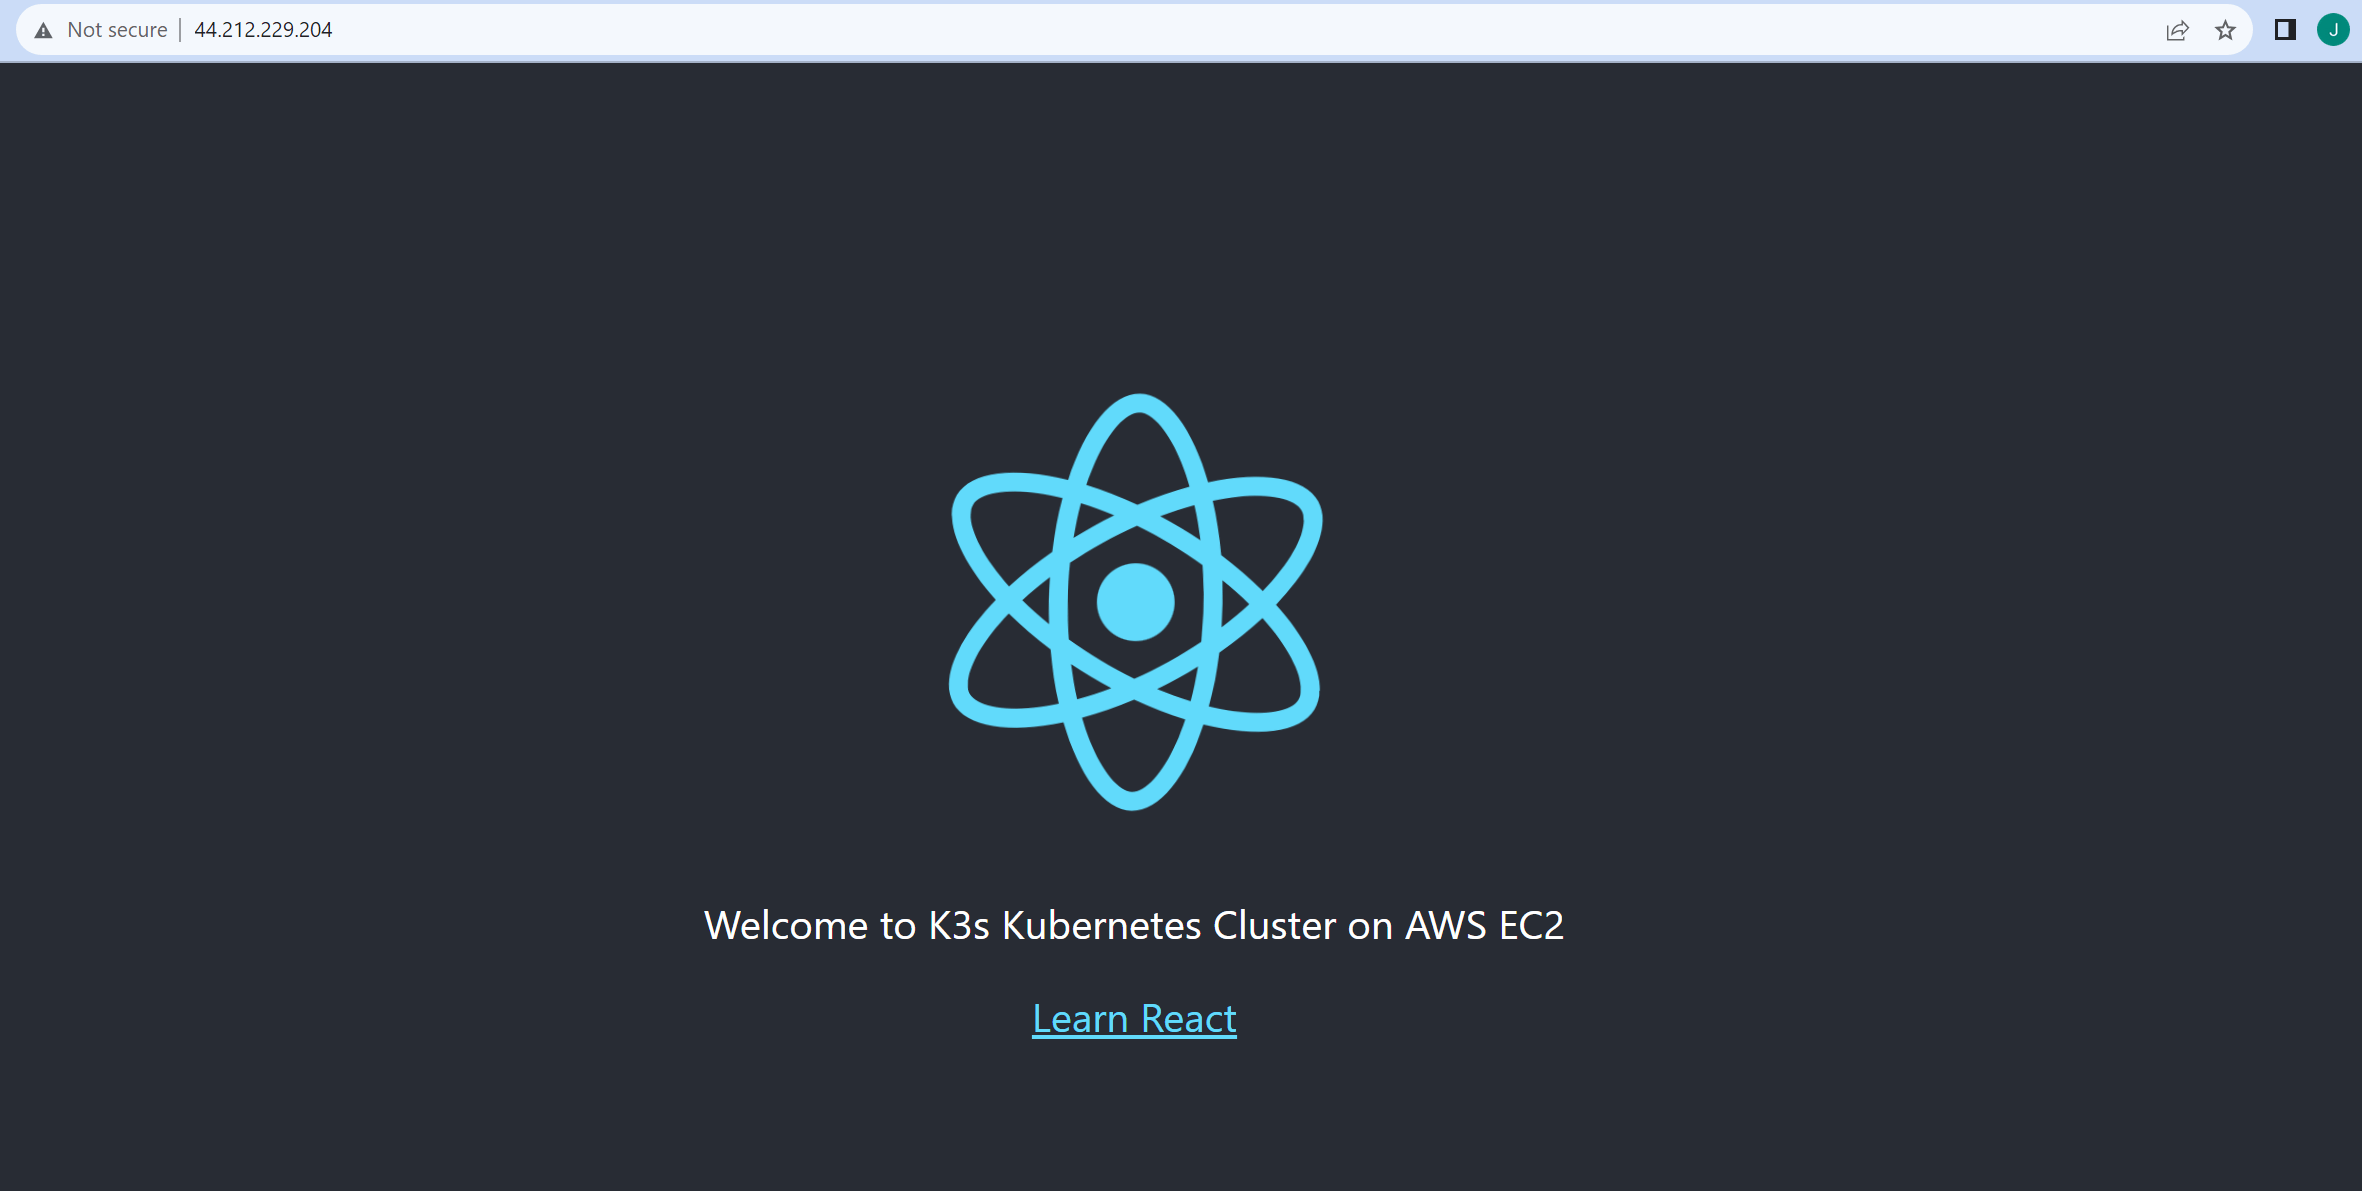 Complete Guide To Running Production K3s Cluster on AWS EC2